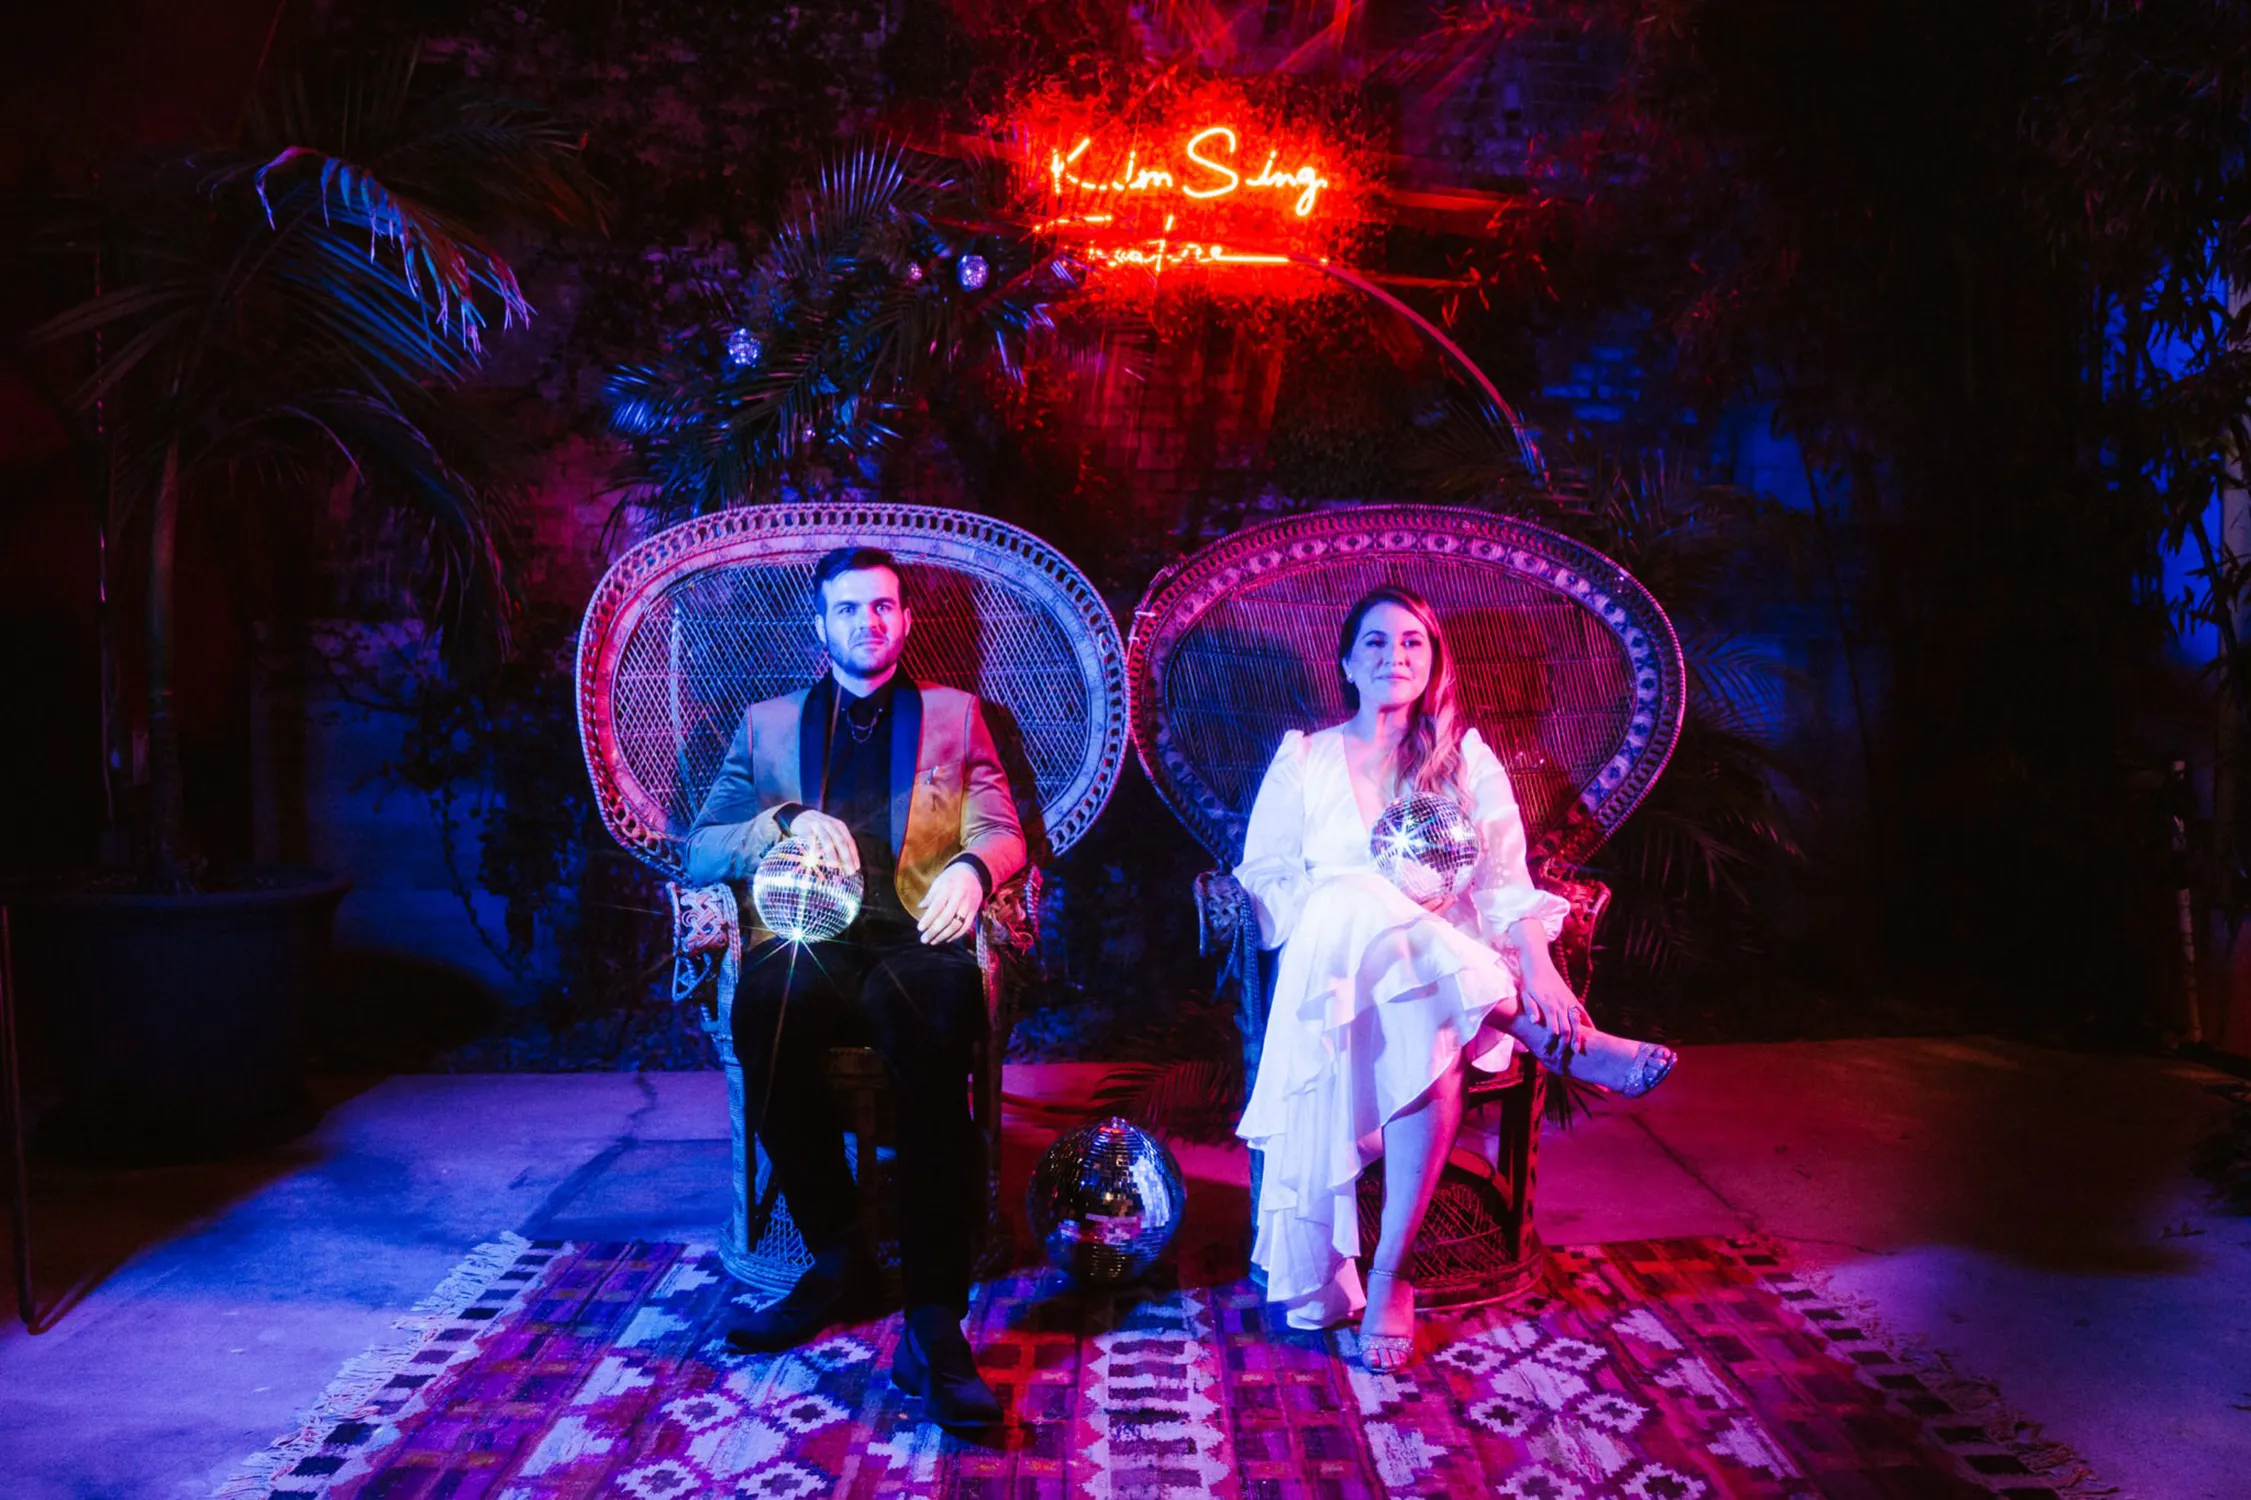 A man and woman seated on peacock chairs under a neon 'Kim Sing Theatre' sign, bathed in vibrant blue and red lighting, creating a dynamic and stylish atmosphere at a trendy event venue.